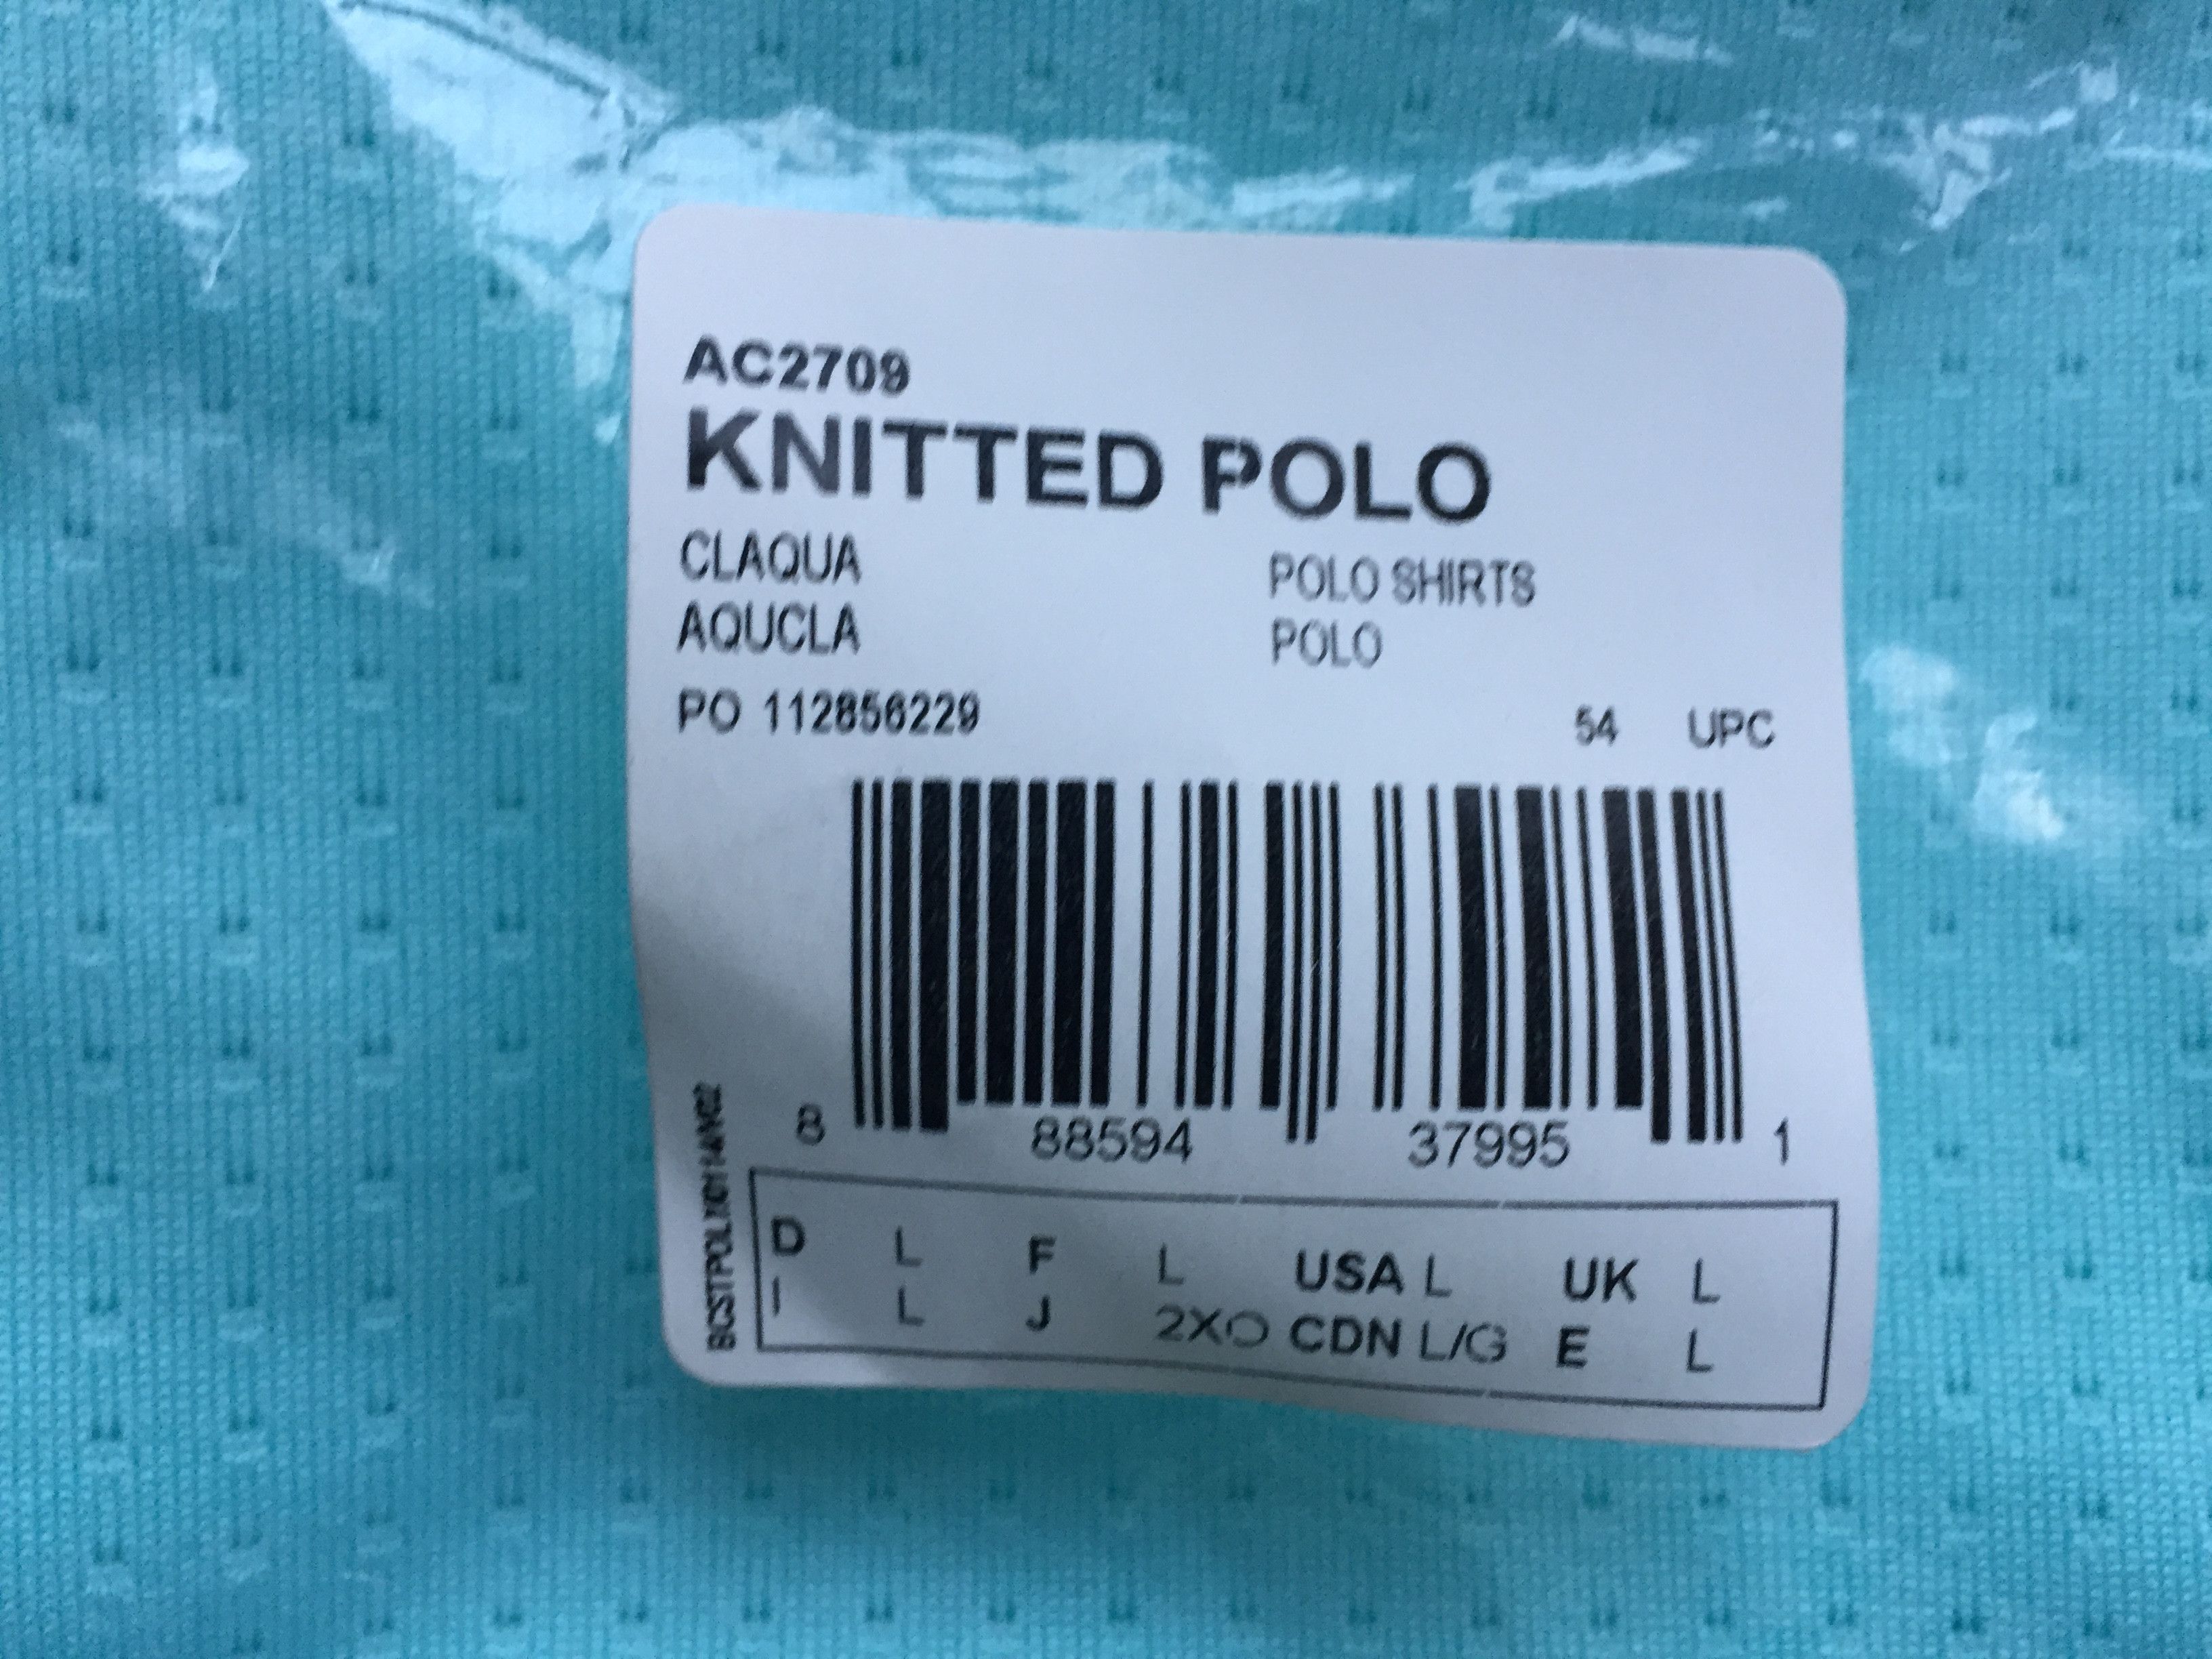 Adidas NEW Palace X Adidas Knitted Polo Aqua Large Size US L / EU 52-54 / 3 - 2 Preview